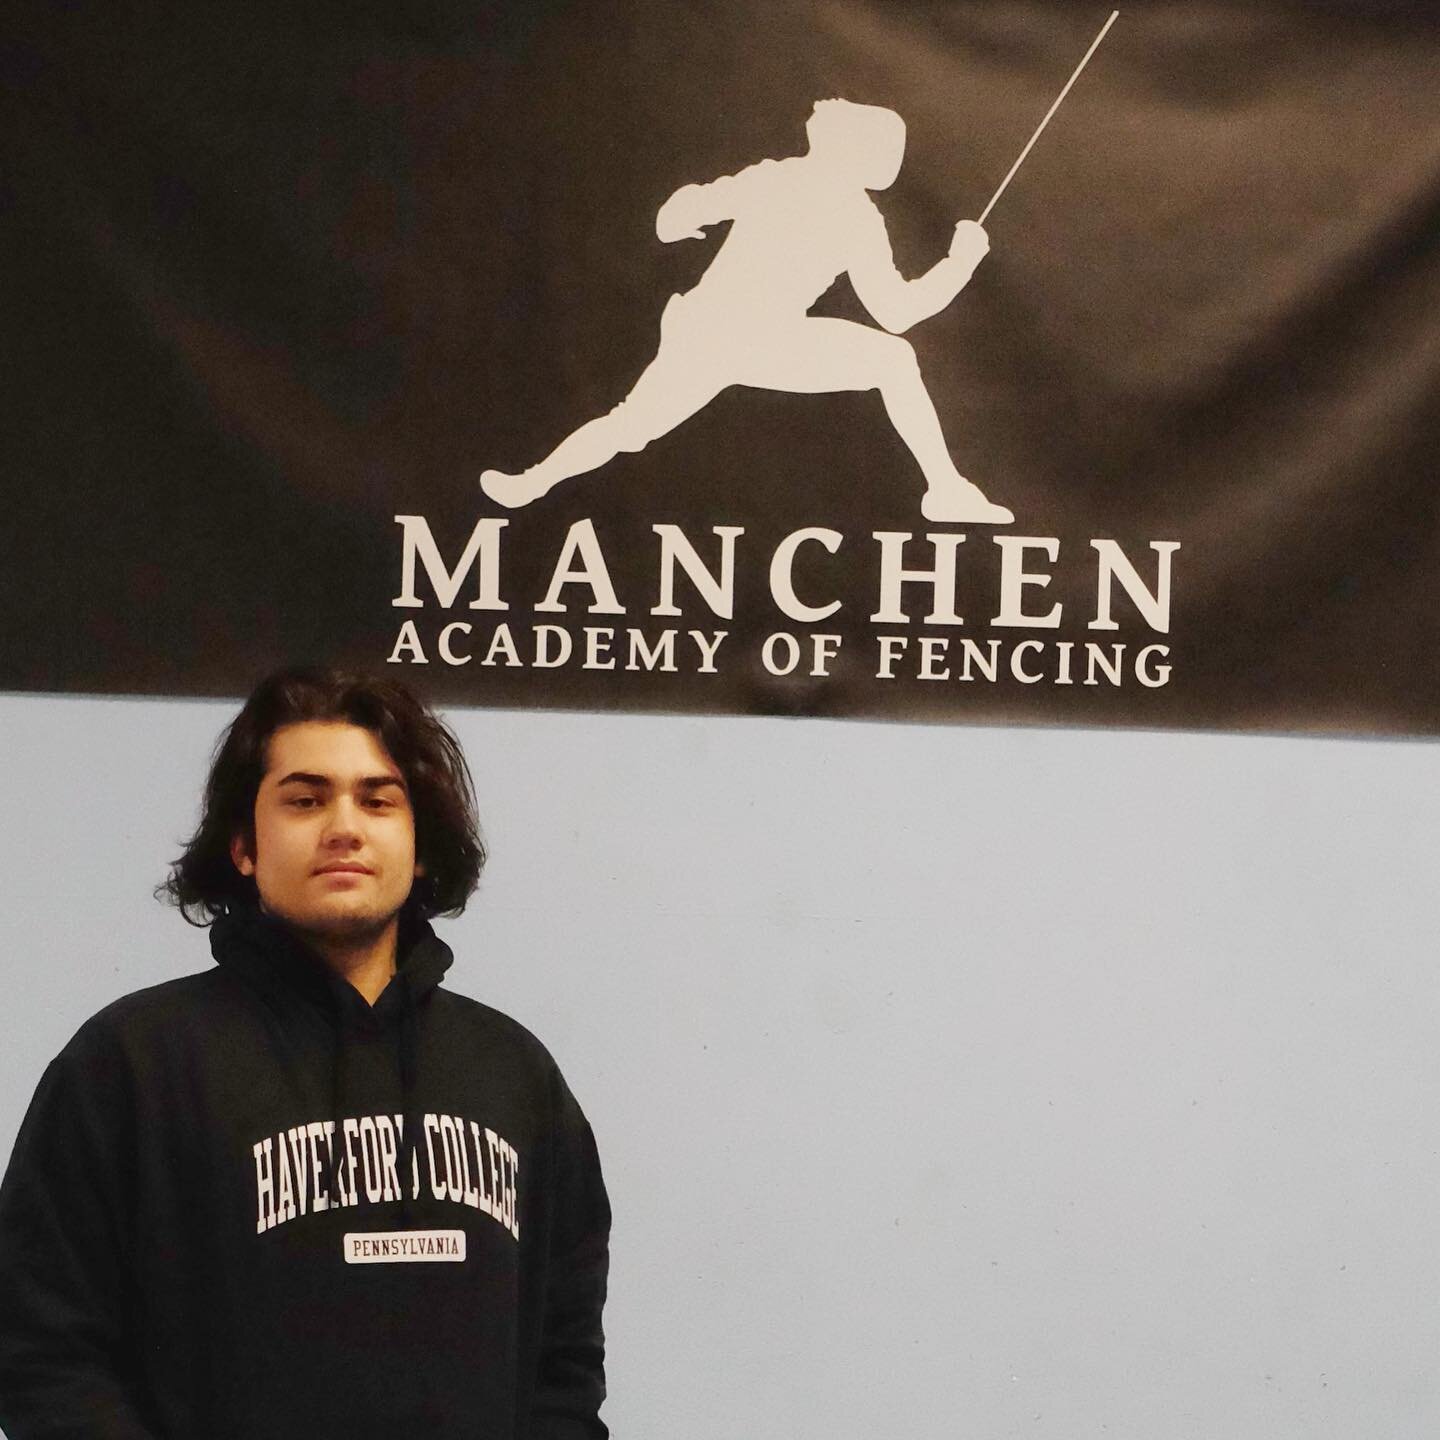 Congratulations to Prem Bhatt. He is from Voorhees High School and will be attending and fencing for Haverford College.